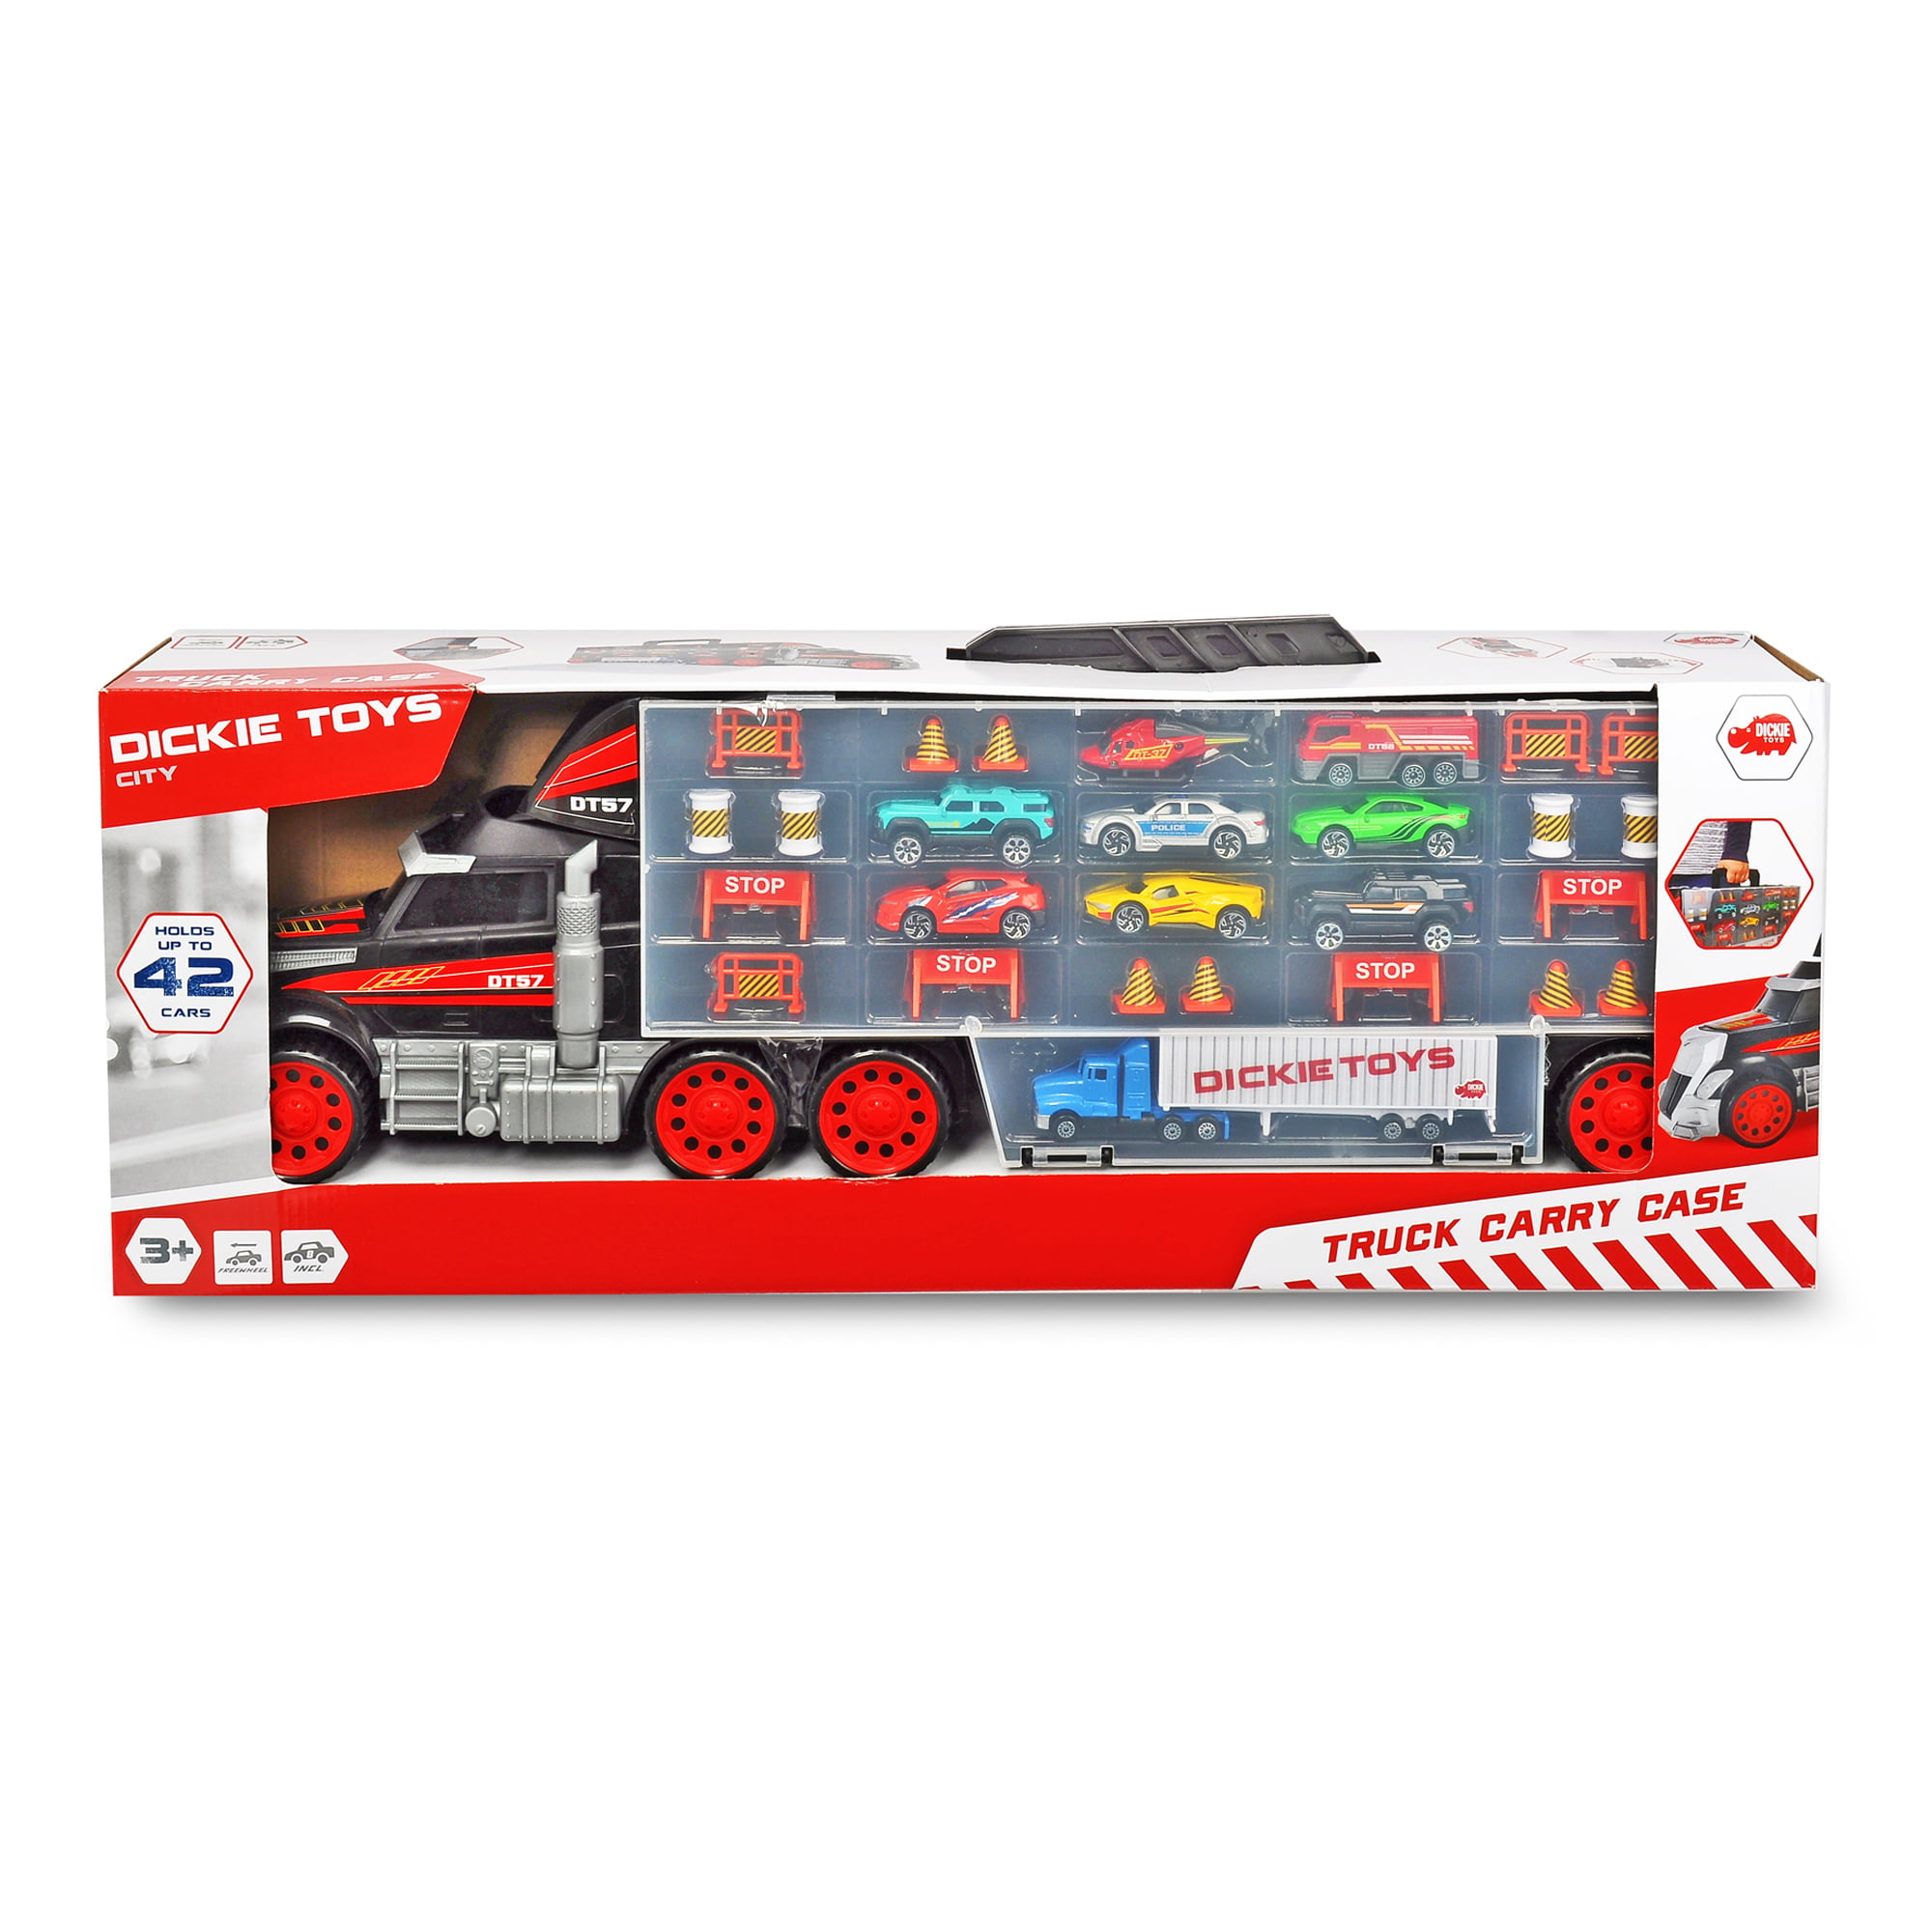 Dickie Toys Truck Carry Case 